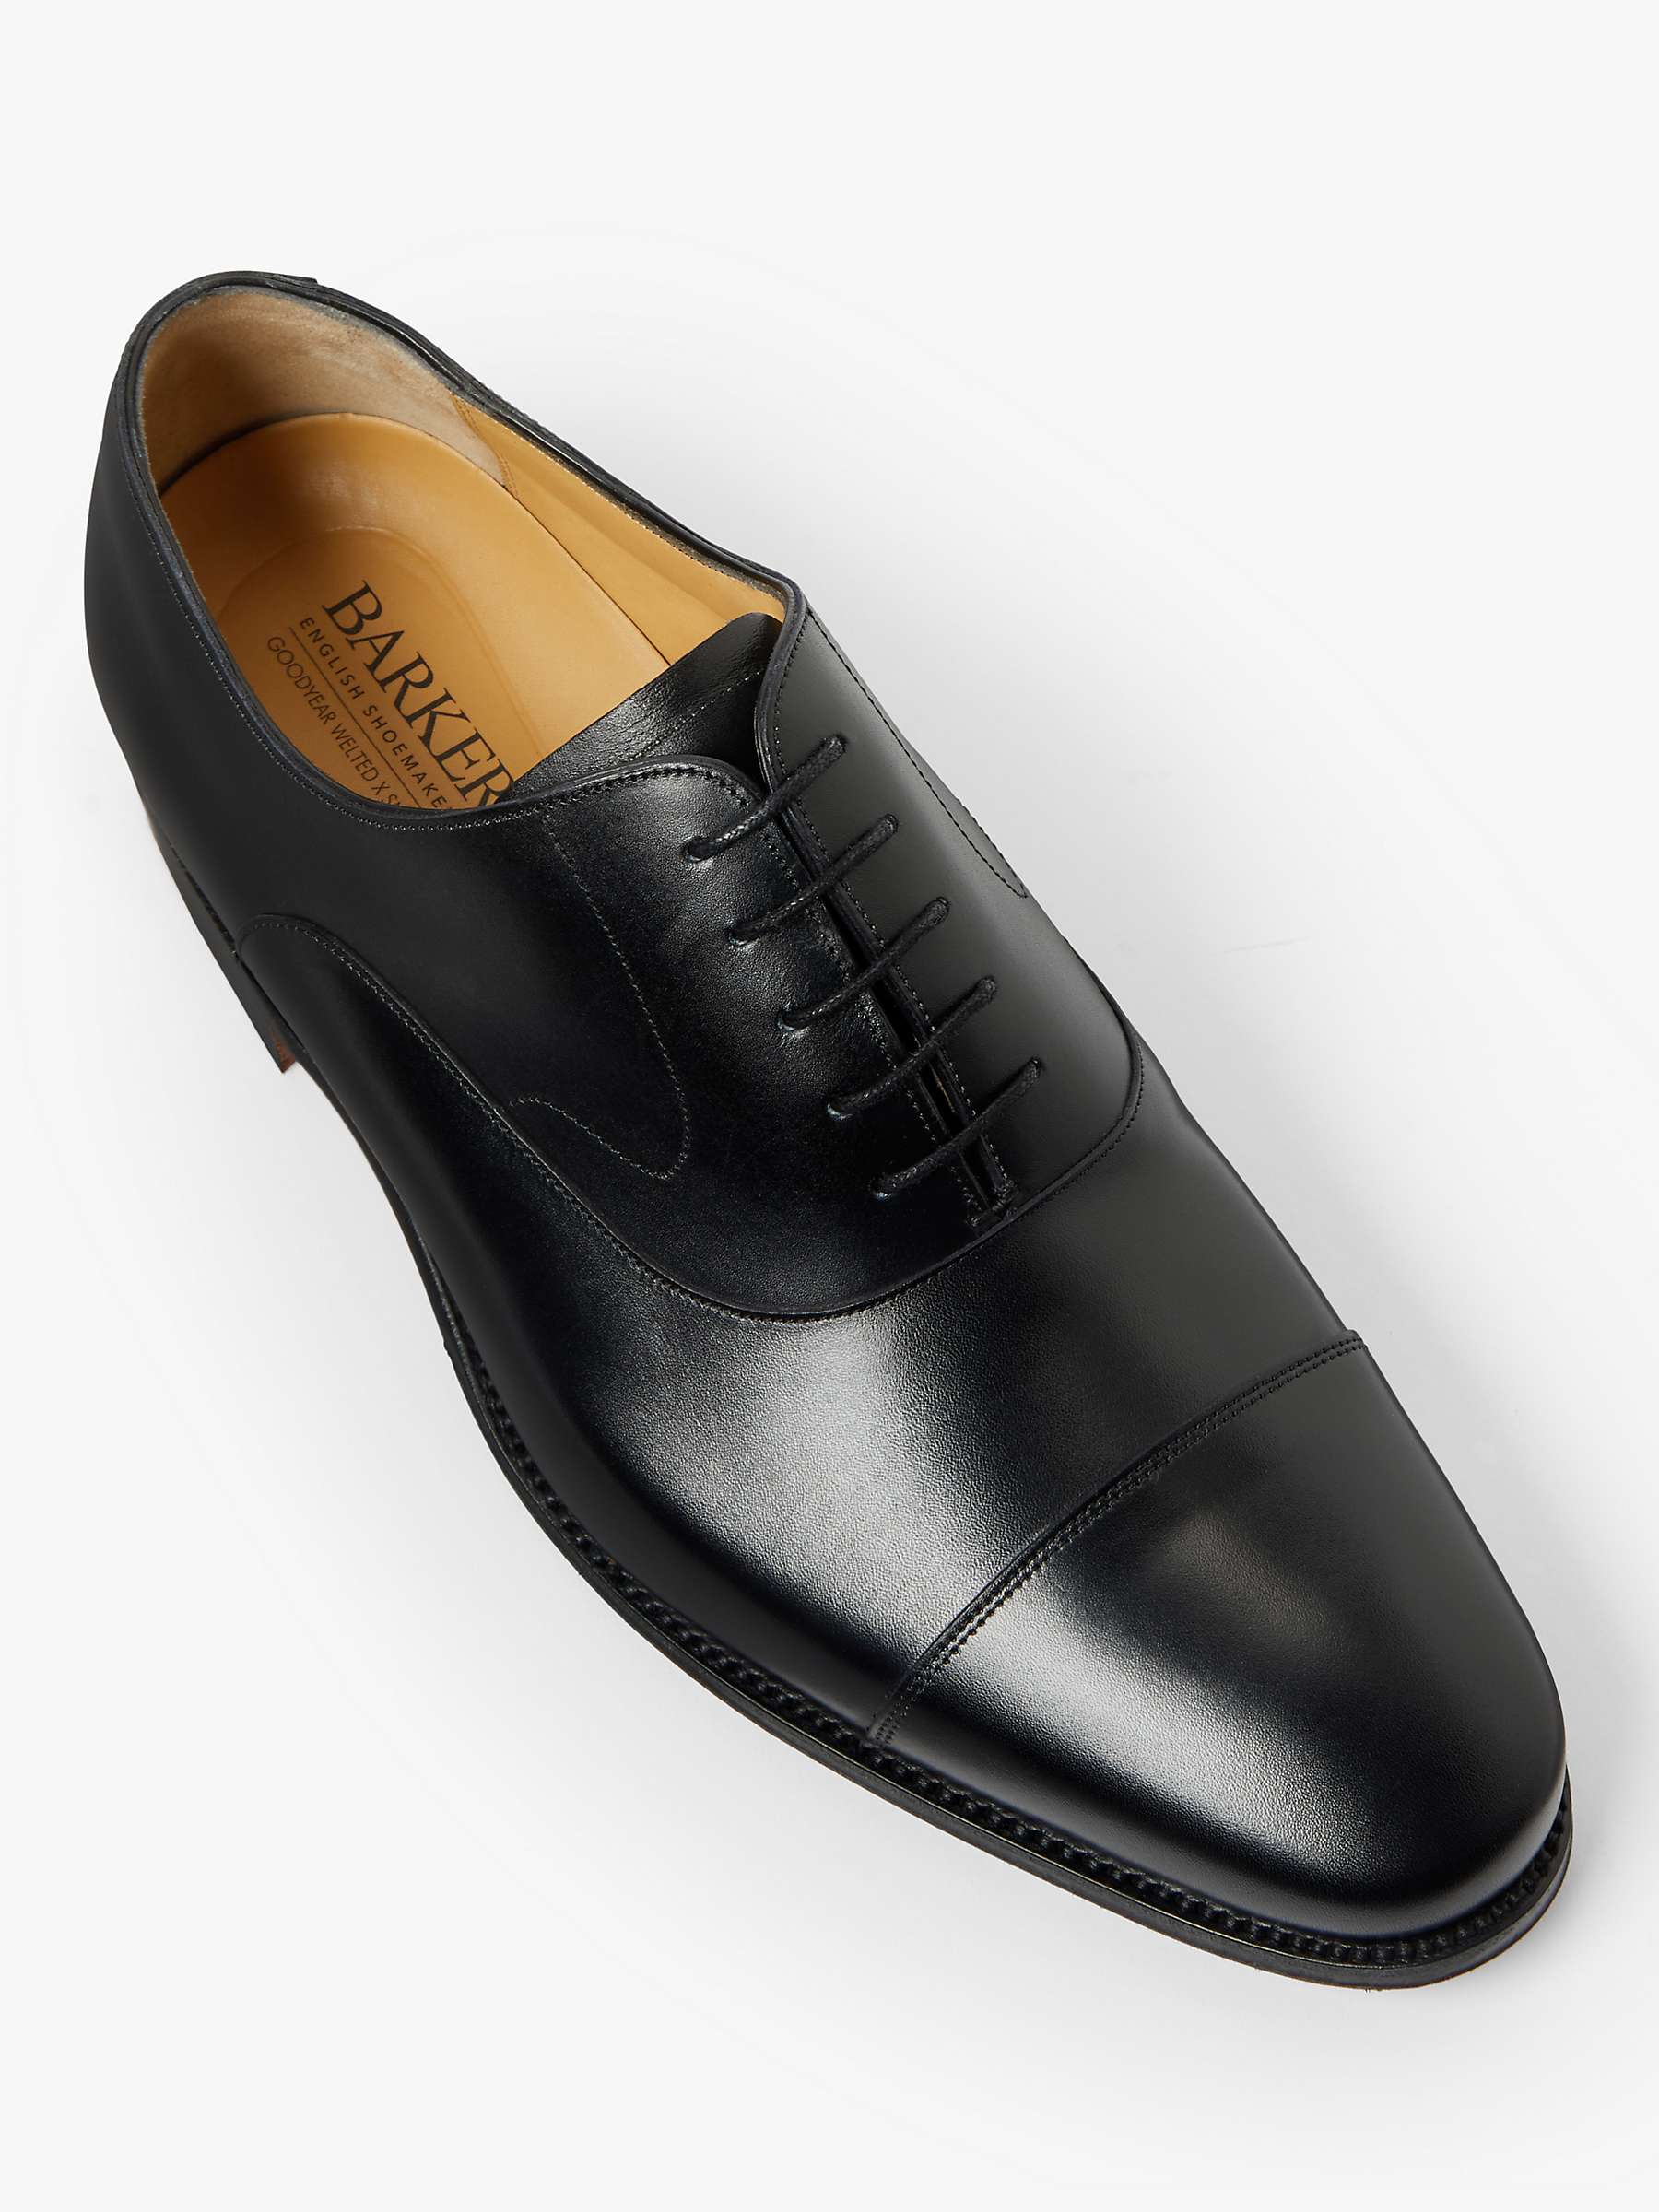 Buy Barker Tech Wright Leather Oxford Shoes, Black Online at johnlewis.com